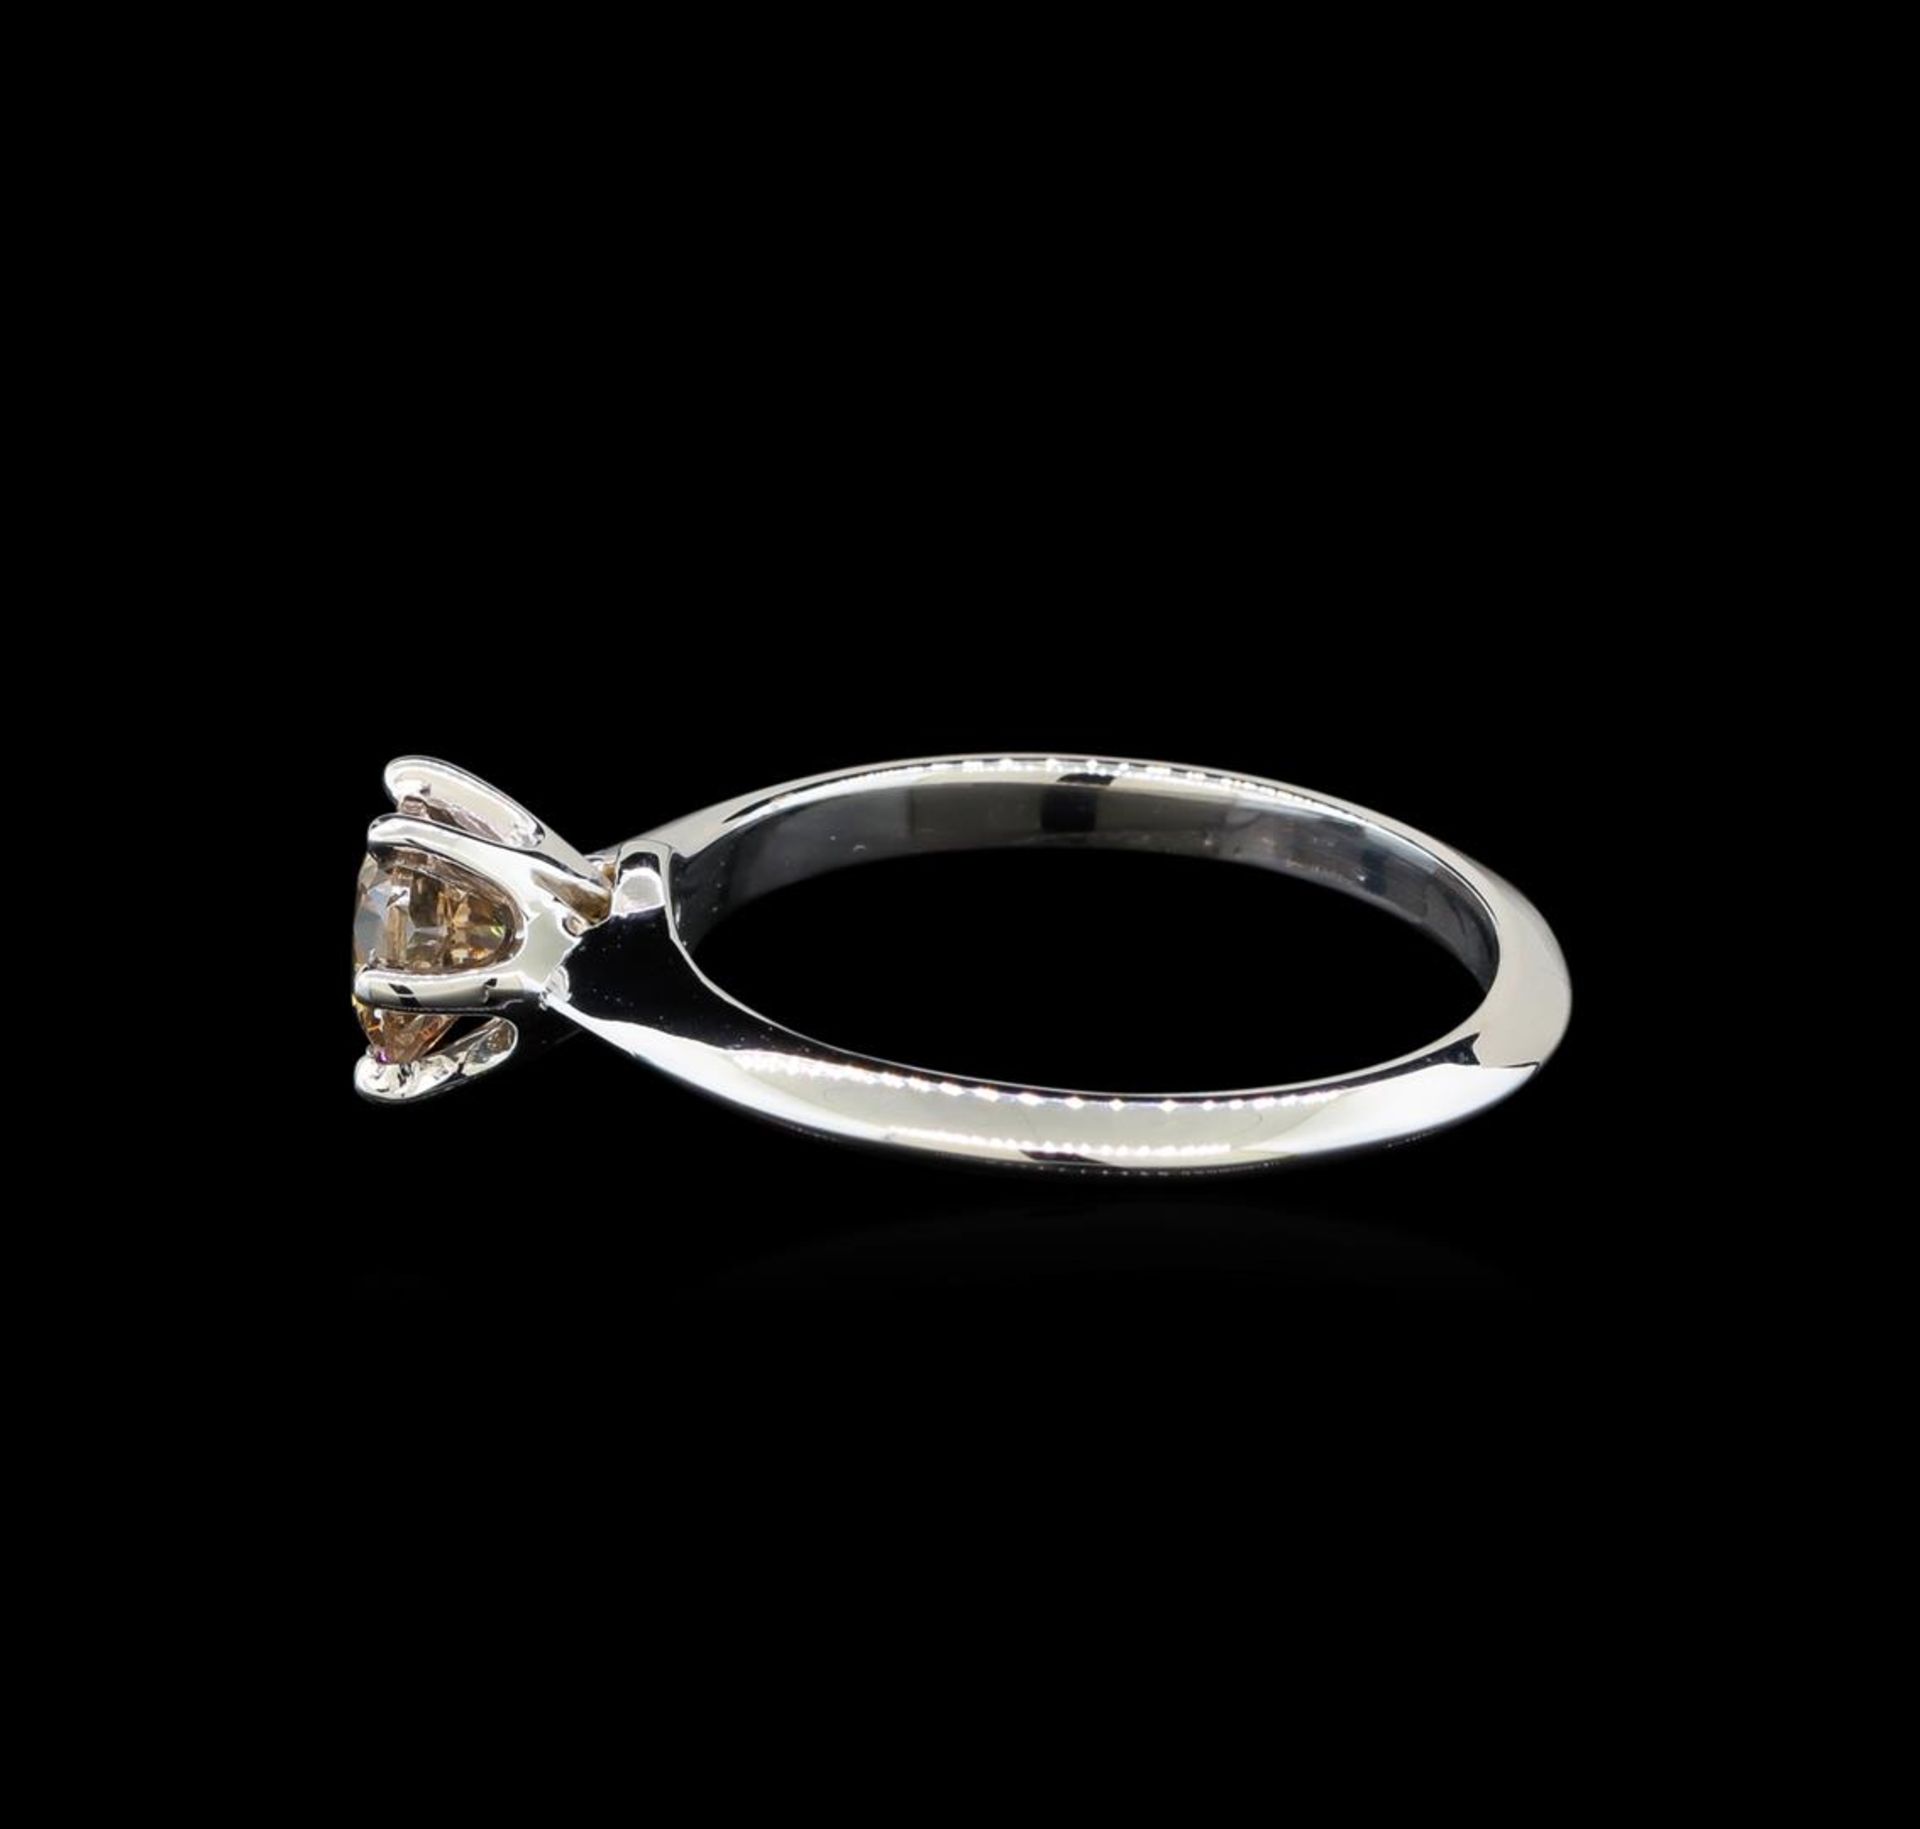 14KT White Gold 0.70 ctw Round Cut Fancy Brown Diamond Solitaire Ring - Image 3 of 5